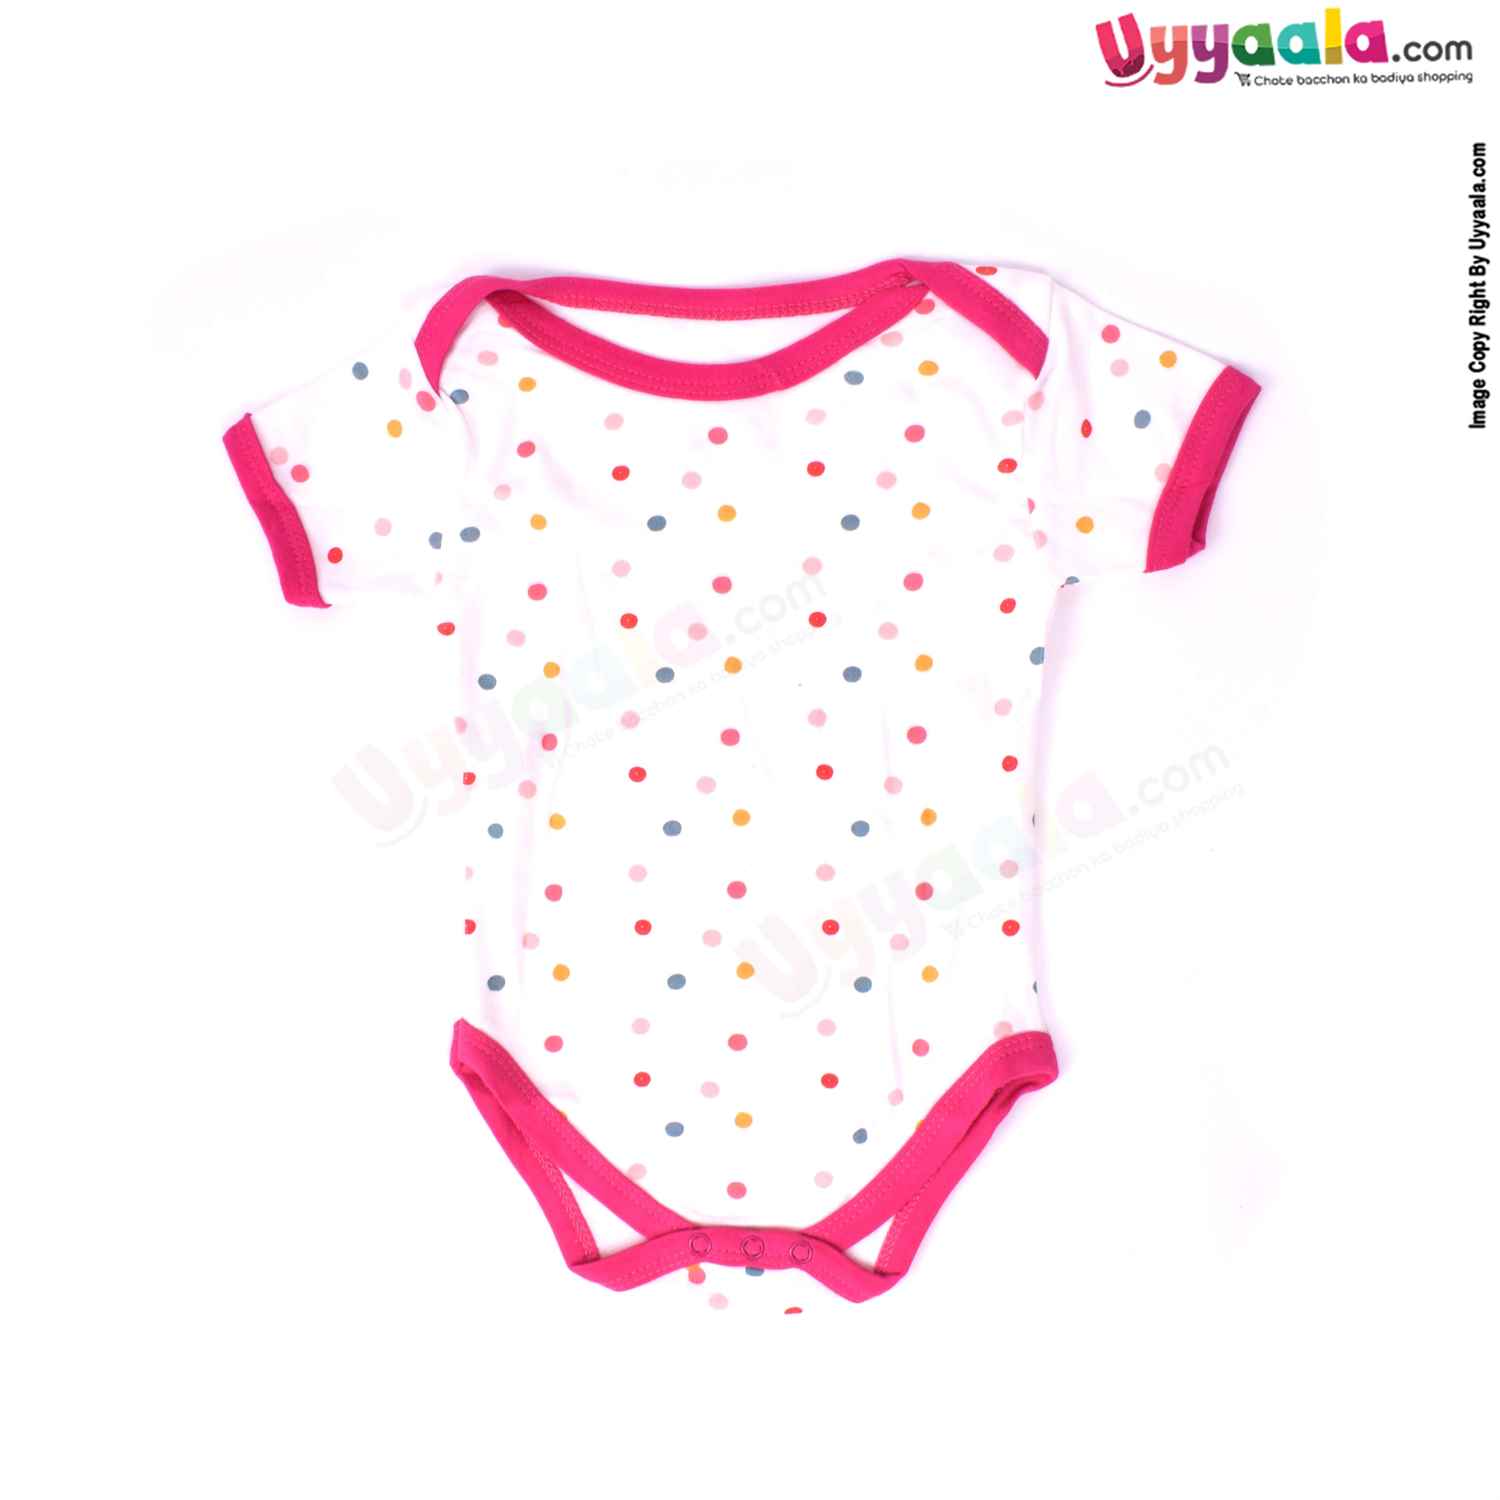 Precious One Short Sleeve Body Suit 100% Soft Hosiery Cotton - White with Dotted Print (6-9M)